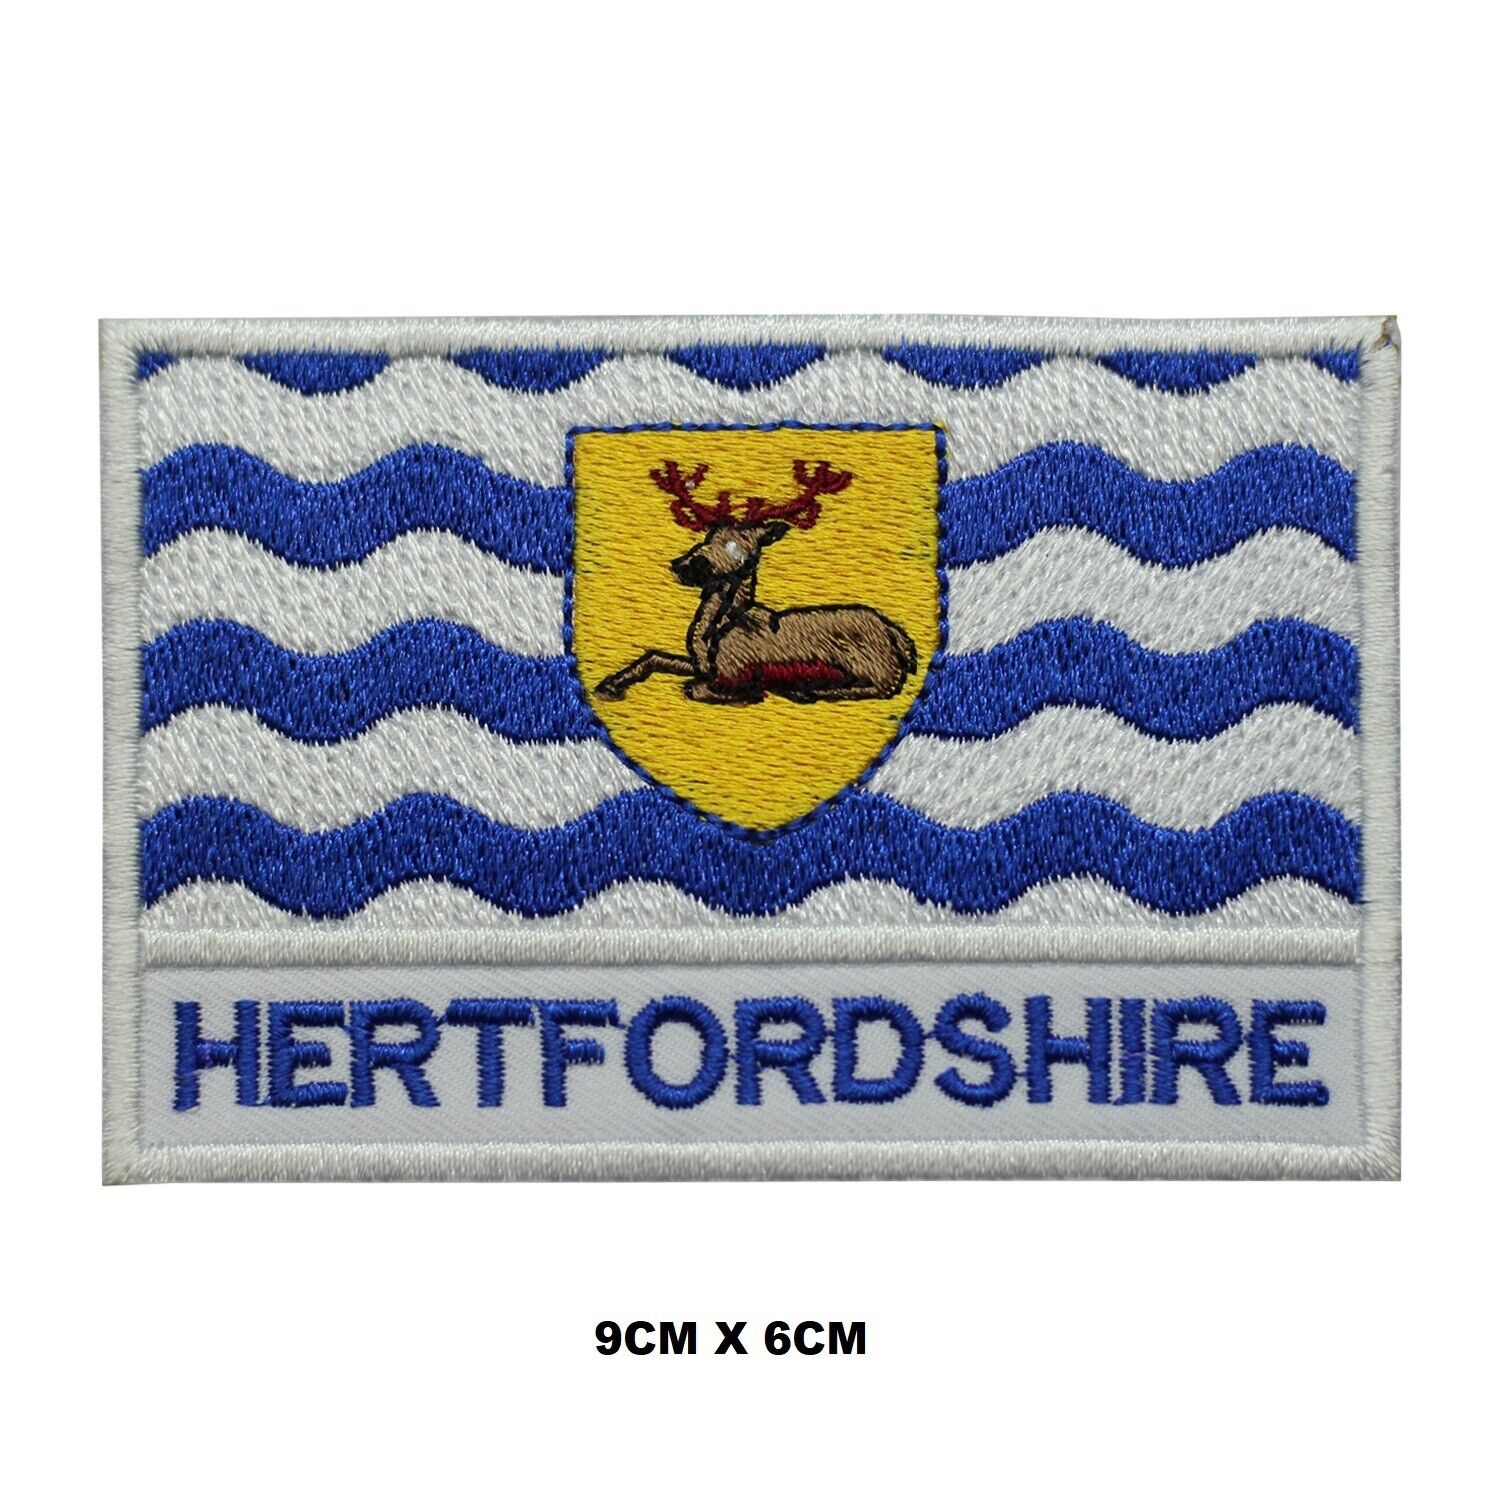 HERTFORDSHIRE County Flag Logo Embroidered Sew/Iron On Patch Patches